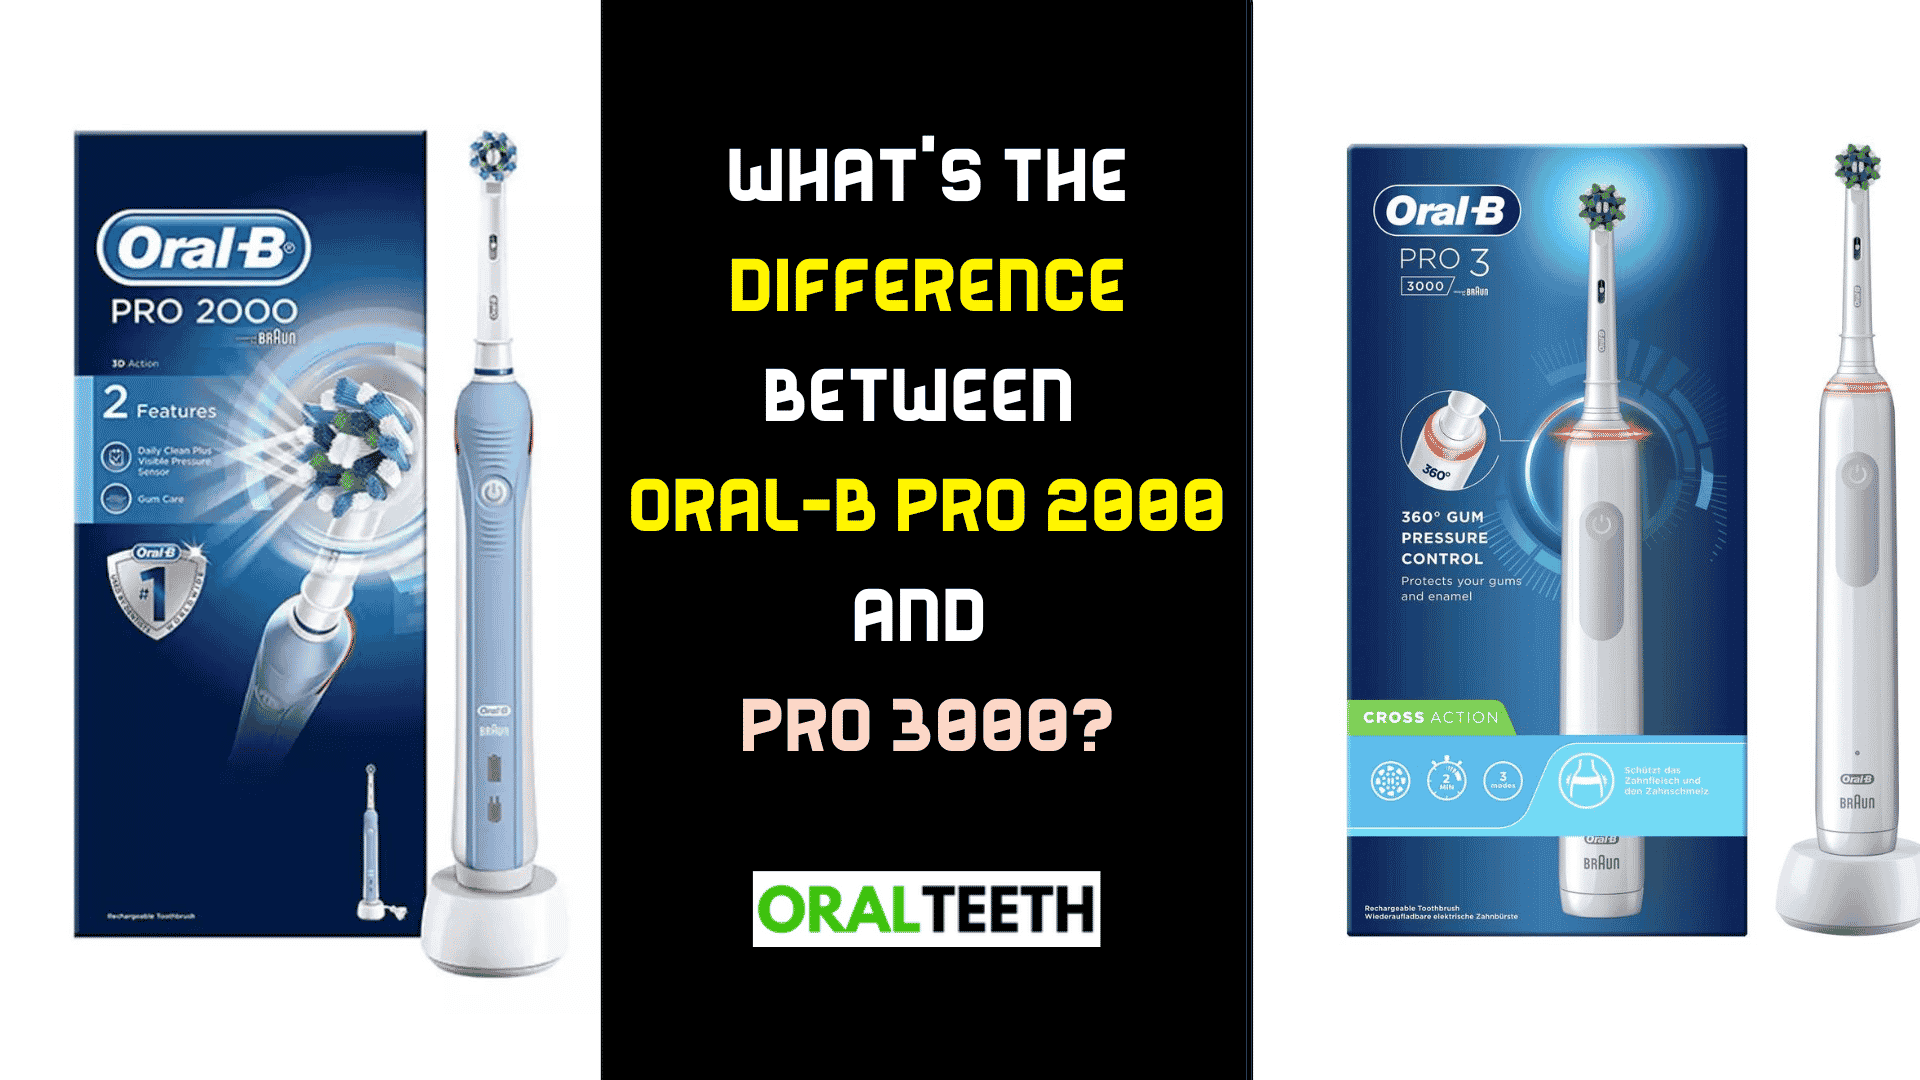 What's The Difference Between Oral-B Pro 2000 And Pro 3000